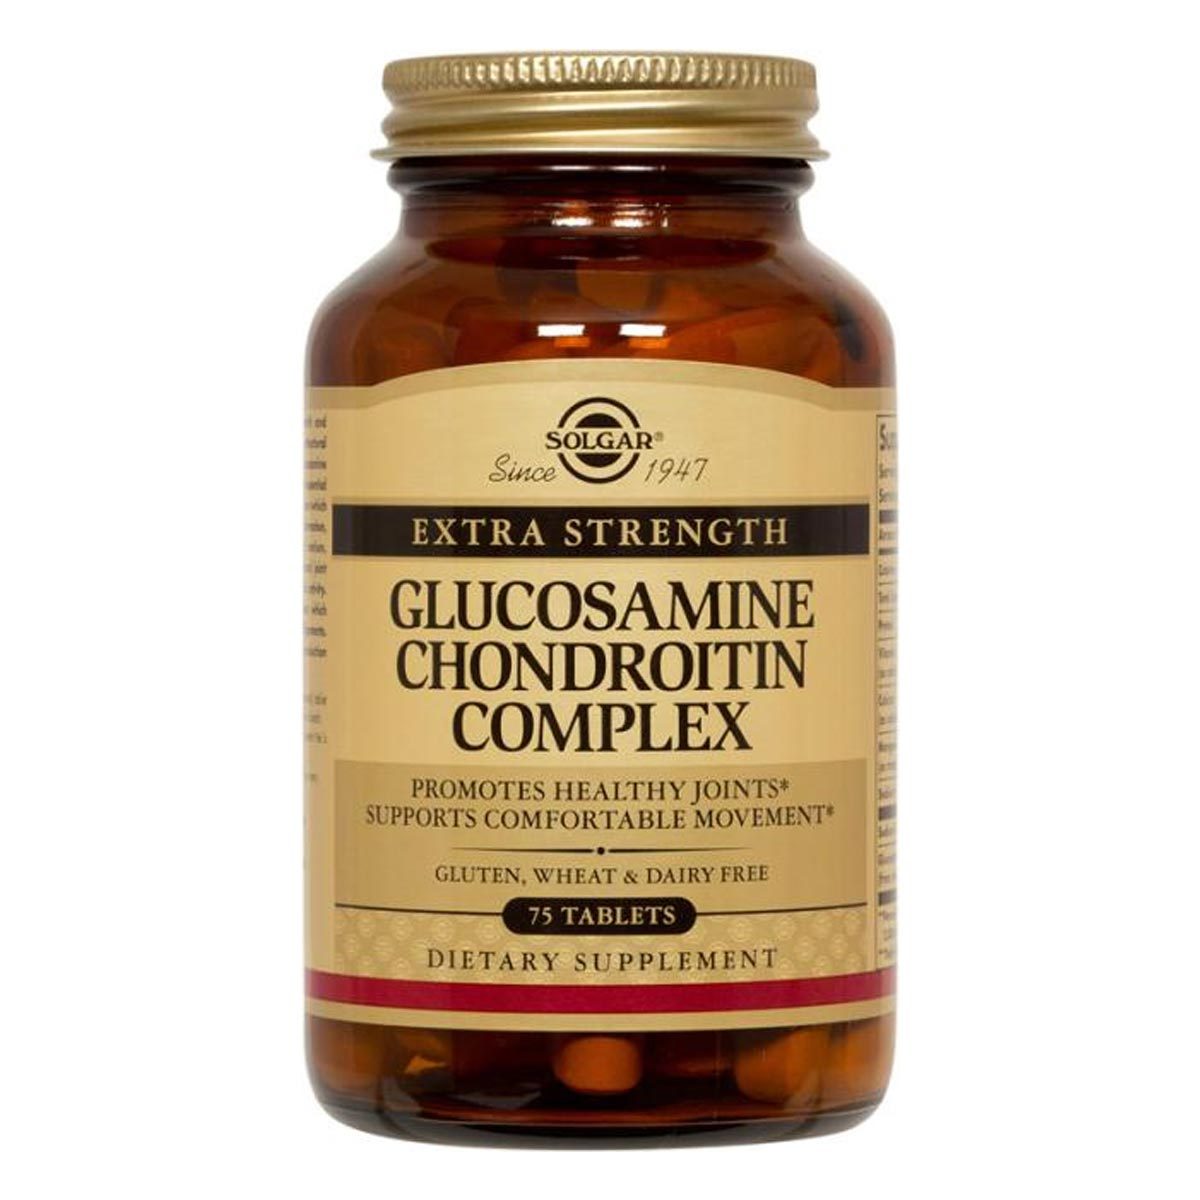 Primary image of Extra Strength Glucosamine Chondroitin Complex